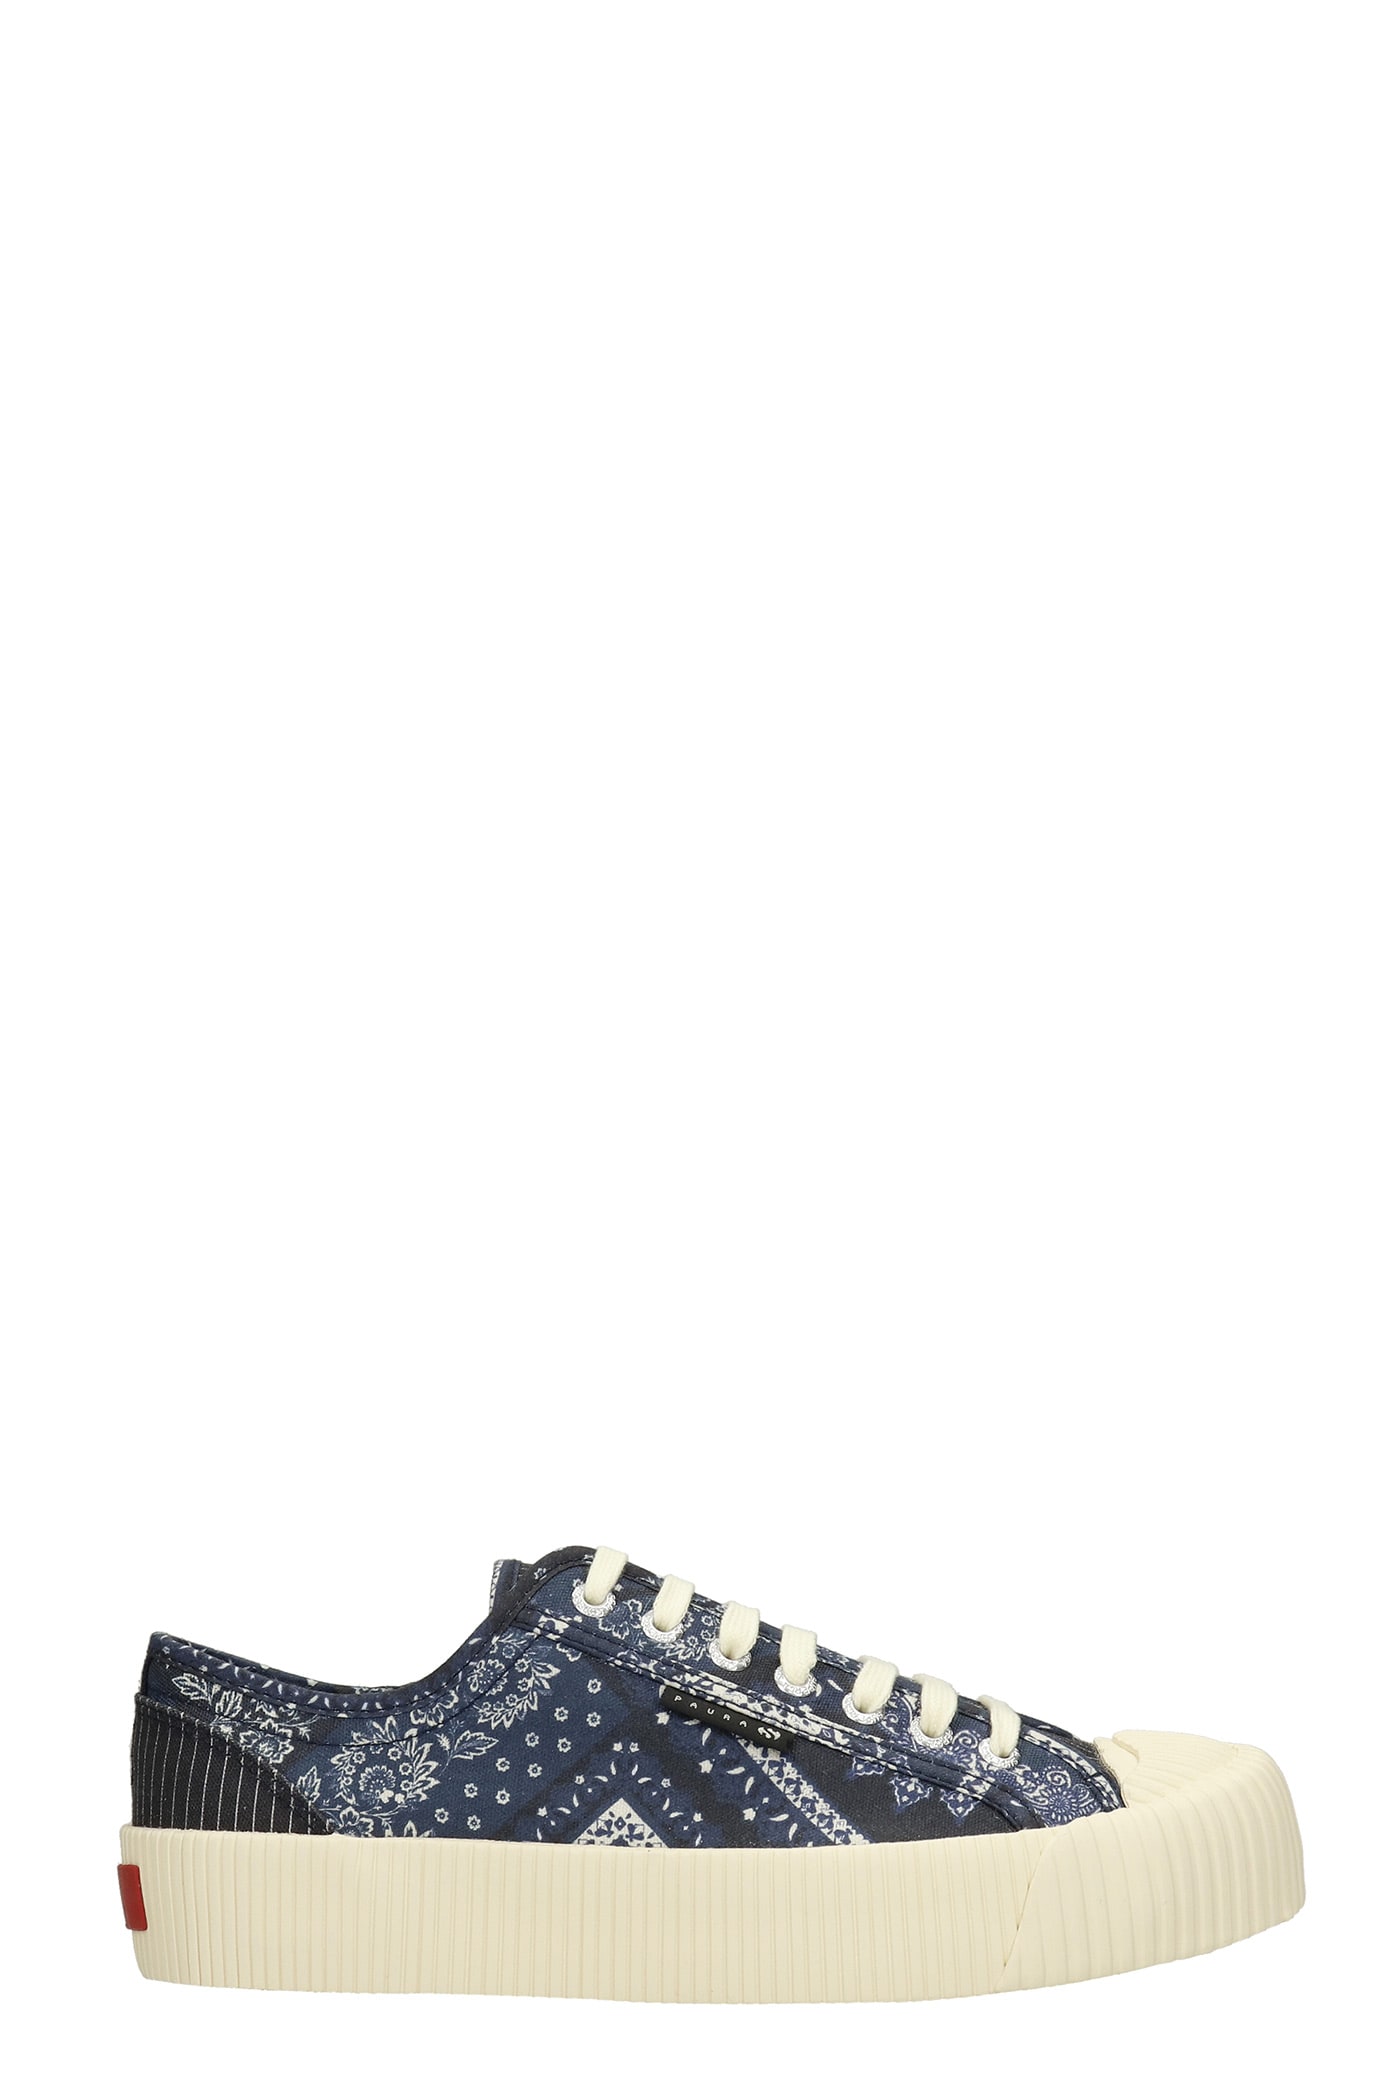 Superga Sneakers In Blue Canvas